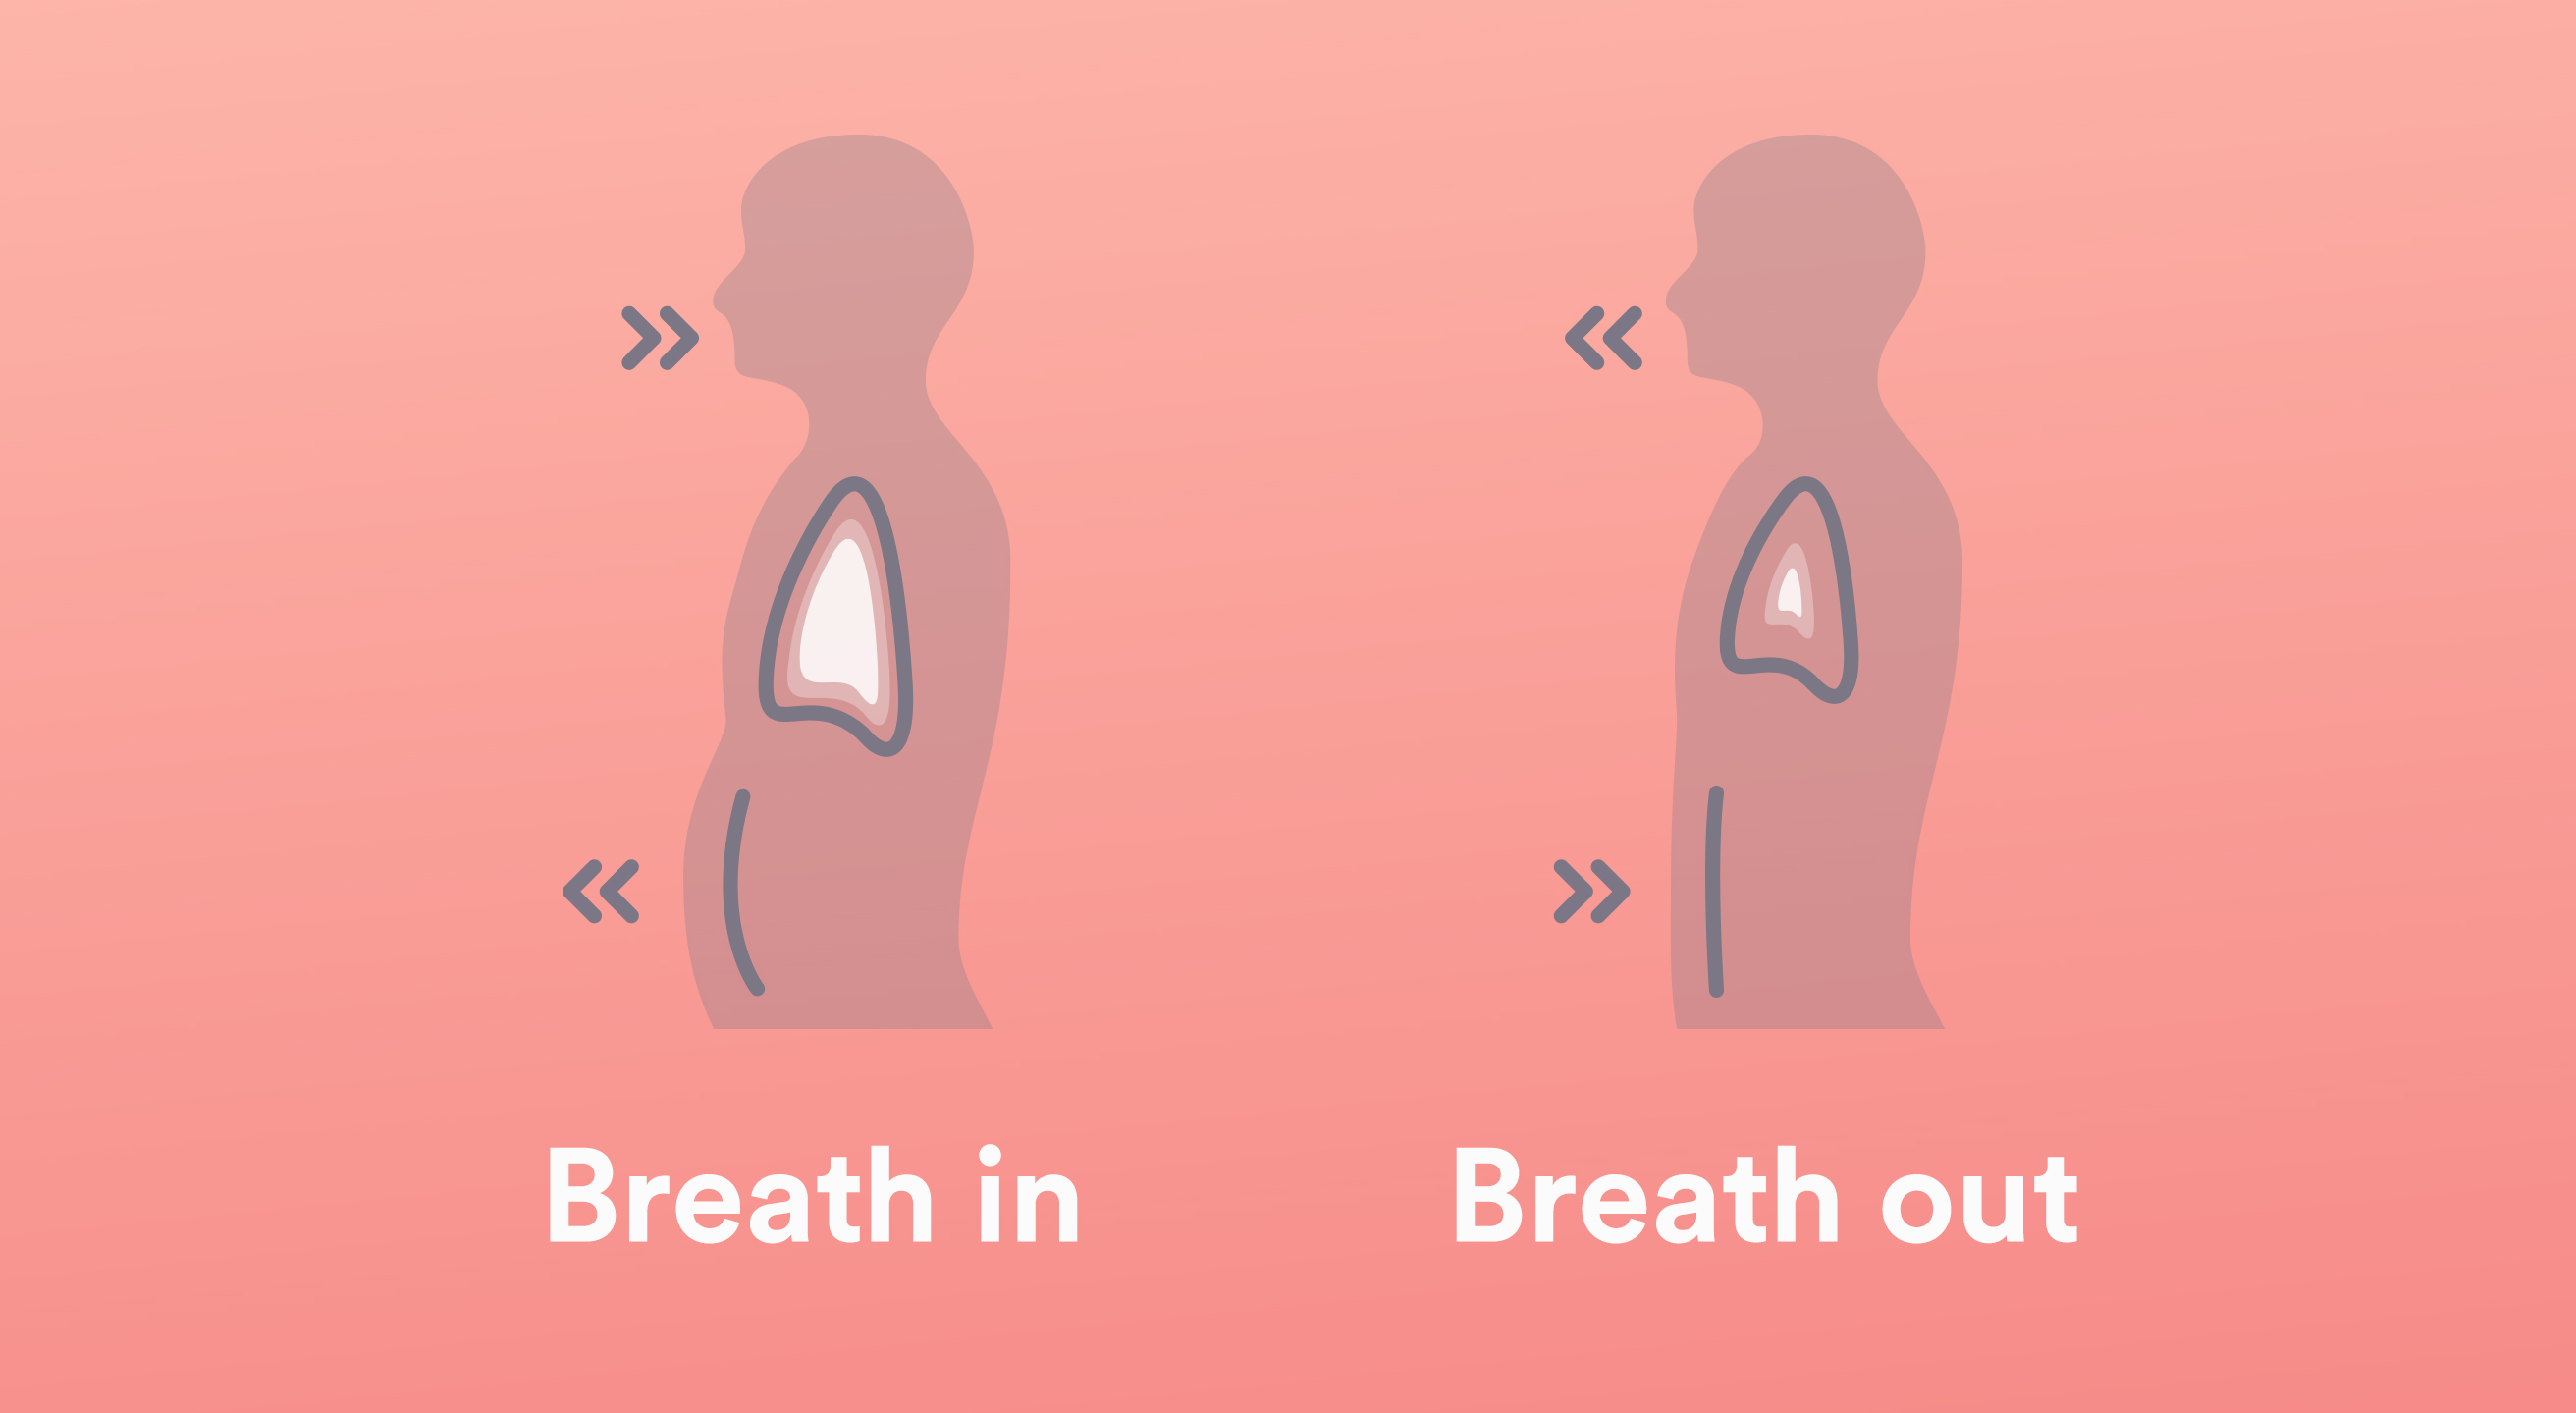 Pursed lip breathing is a technique designed to make breathing more ef... |  TikTok